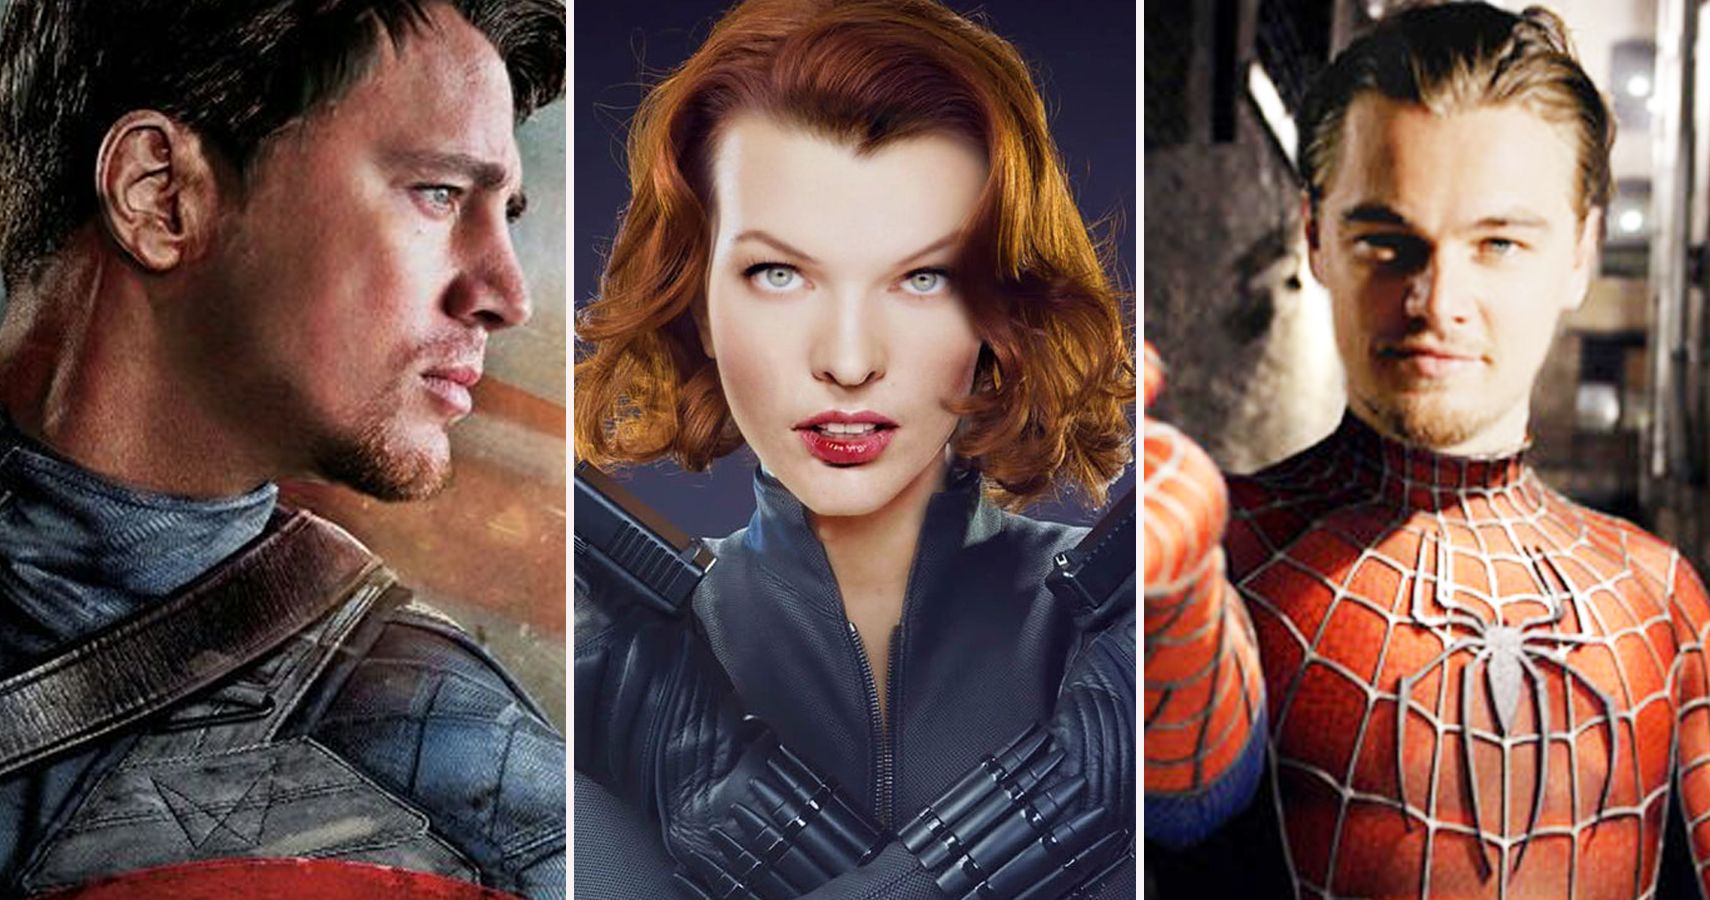 Marvels The Avengers 10 Photoshop Fancastings Better Than The Actual Movies (And 10 That Could Never Work)